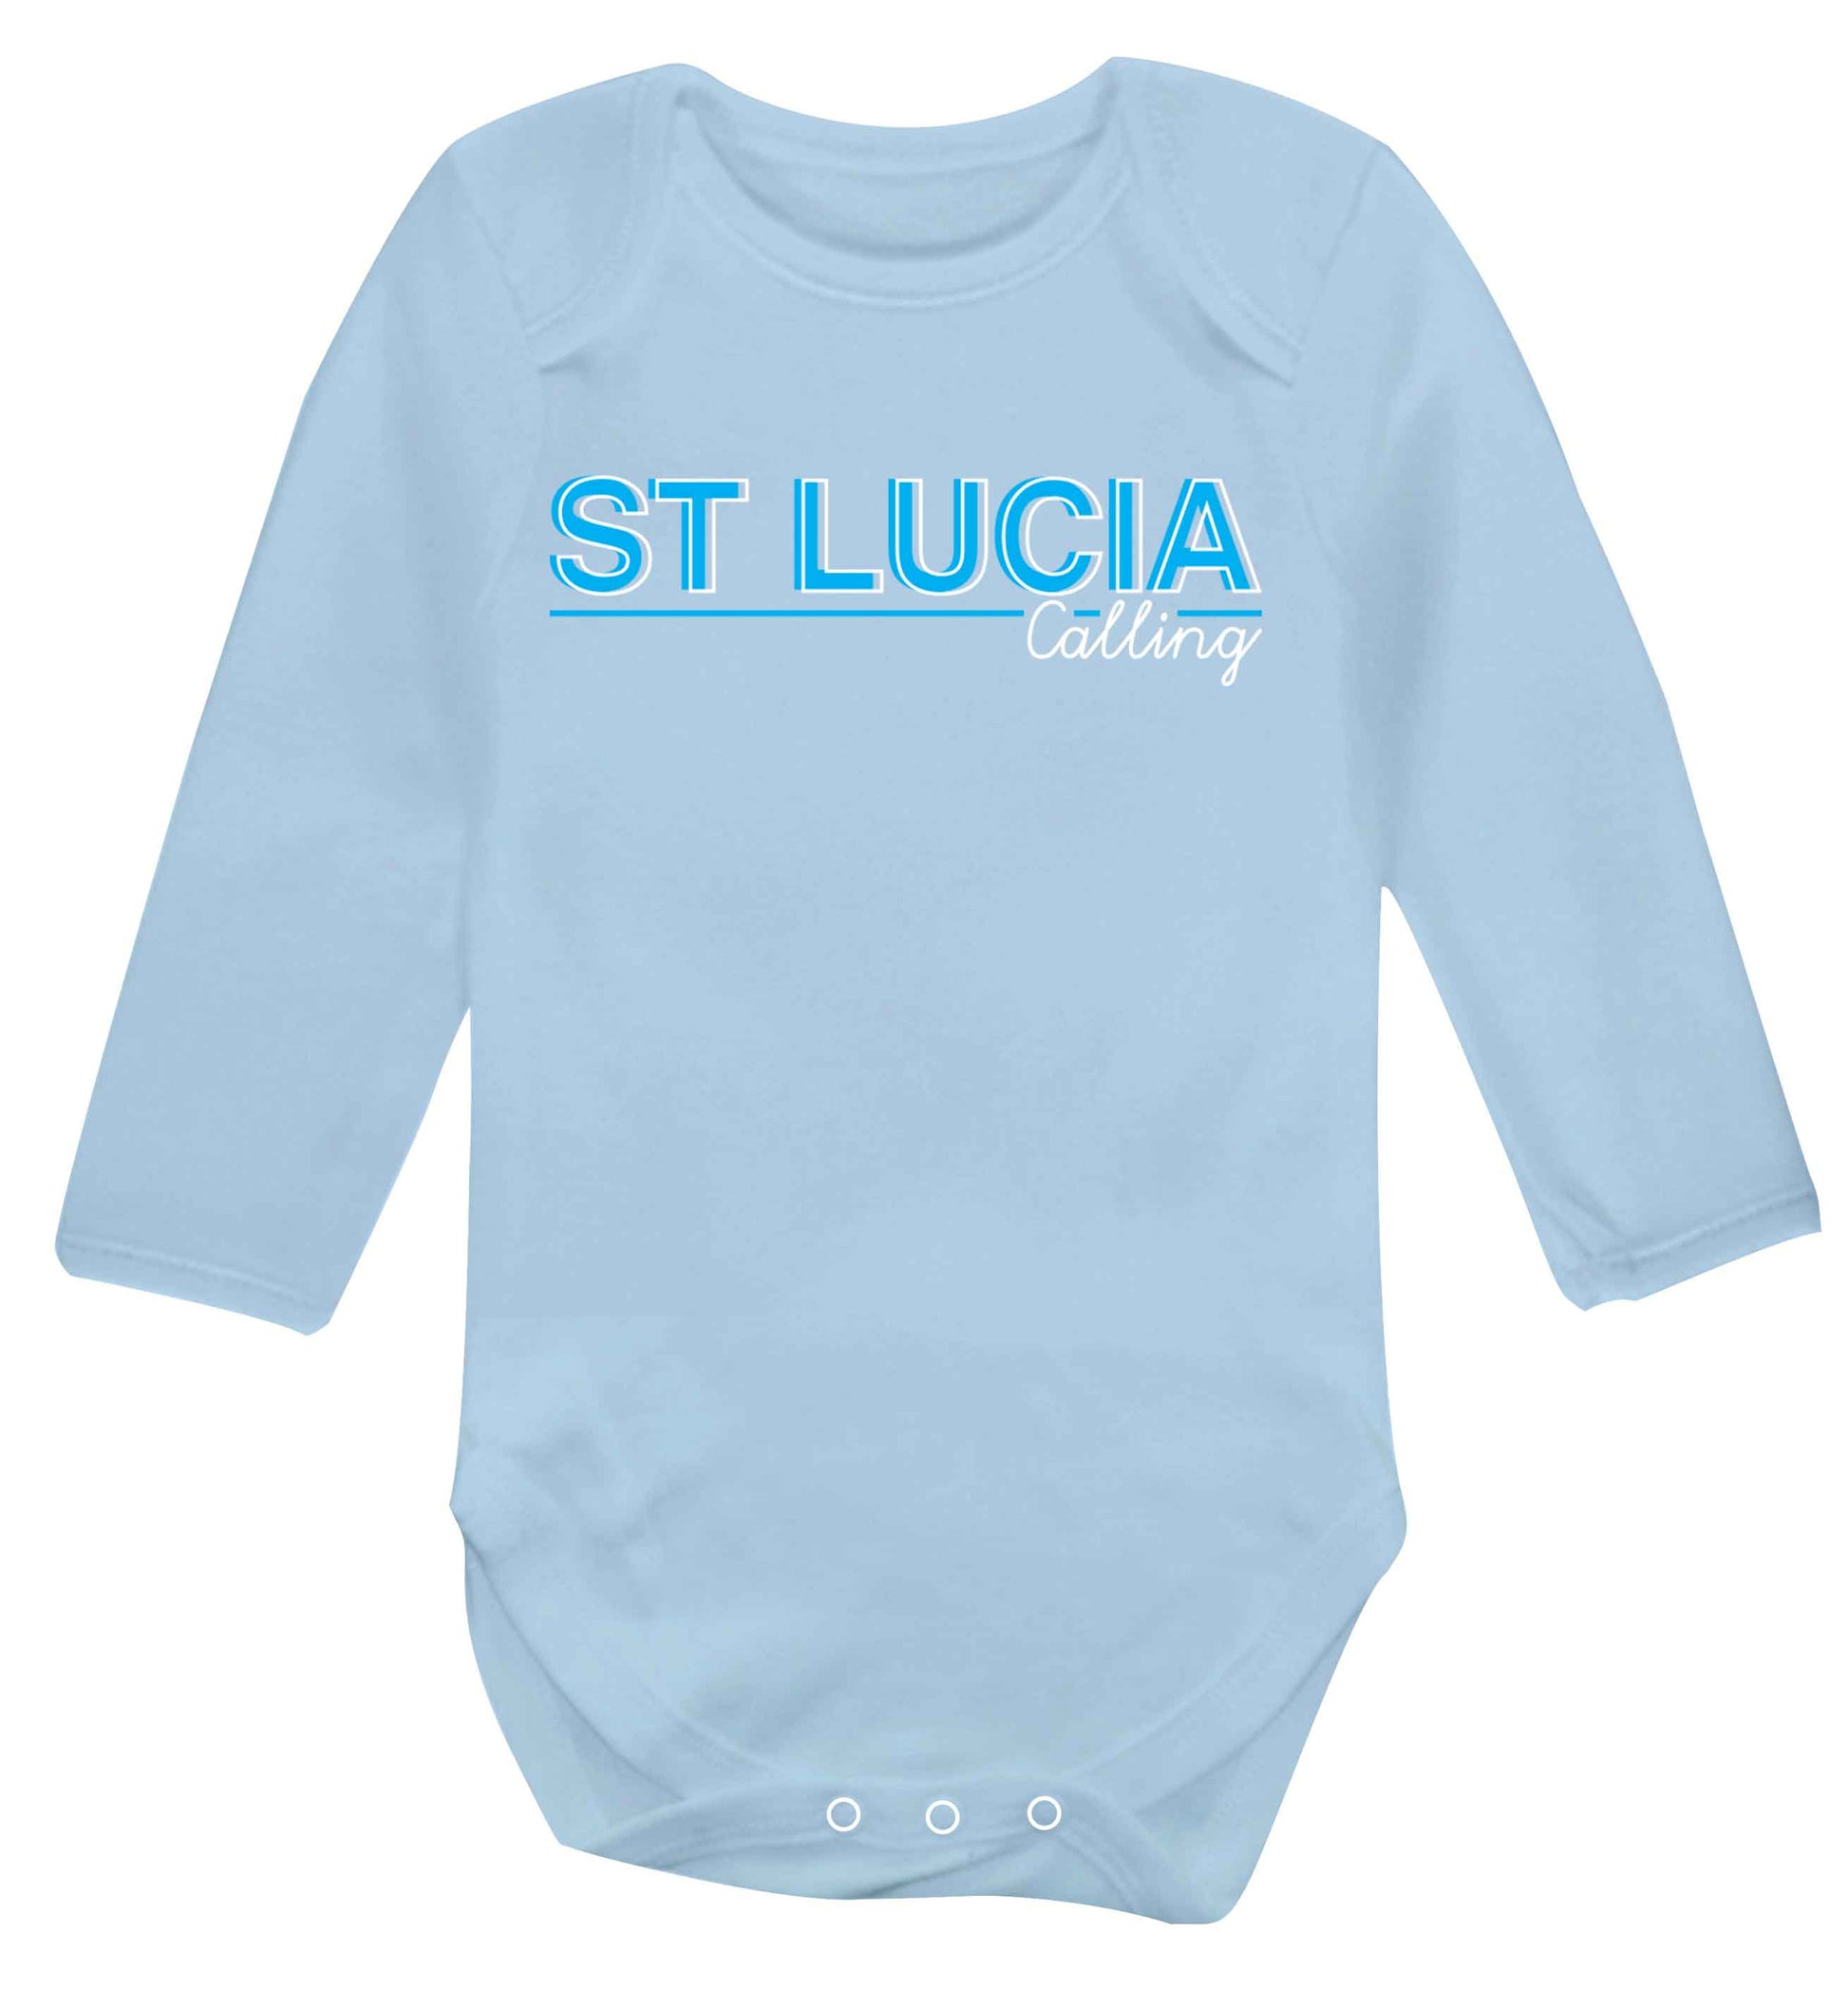 St Lucia calling Baby Vest long sleeved pale blue 6-12 months